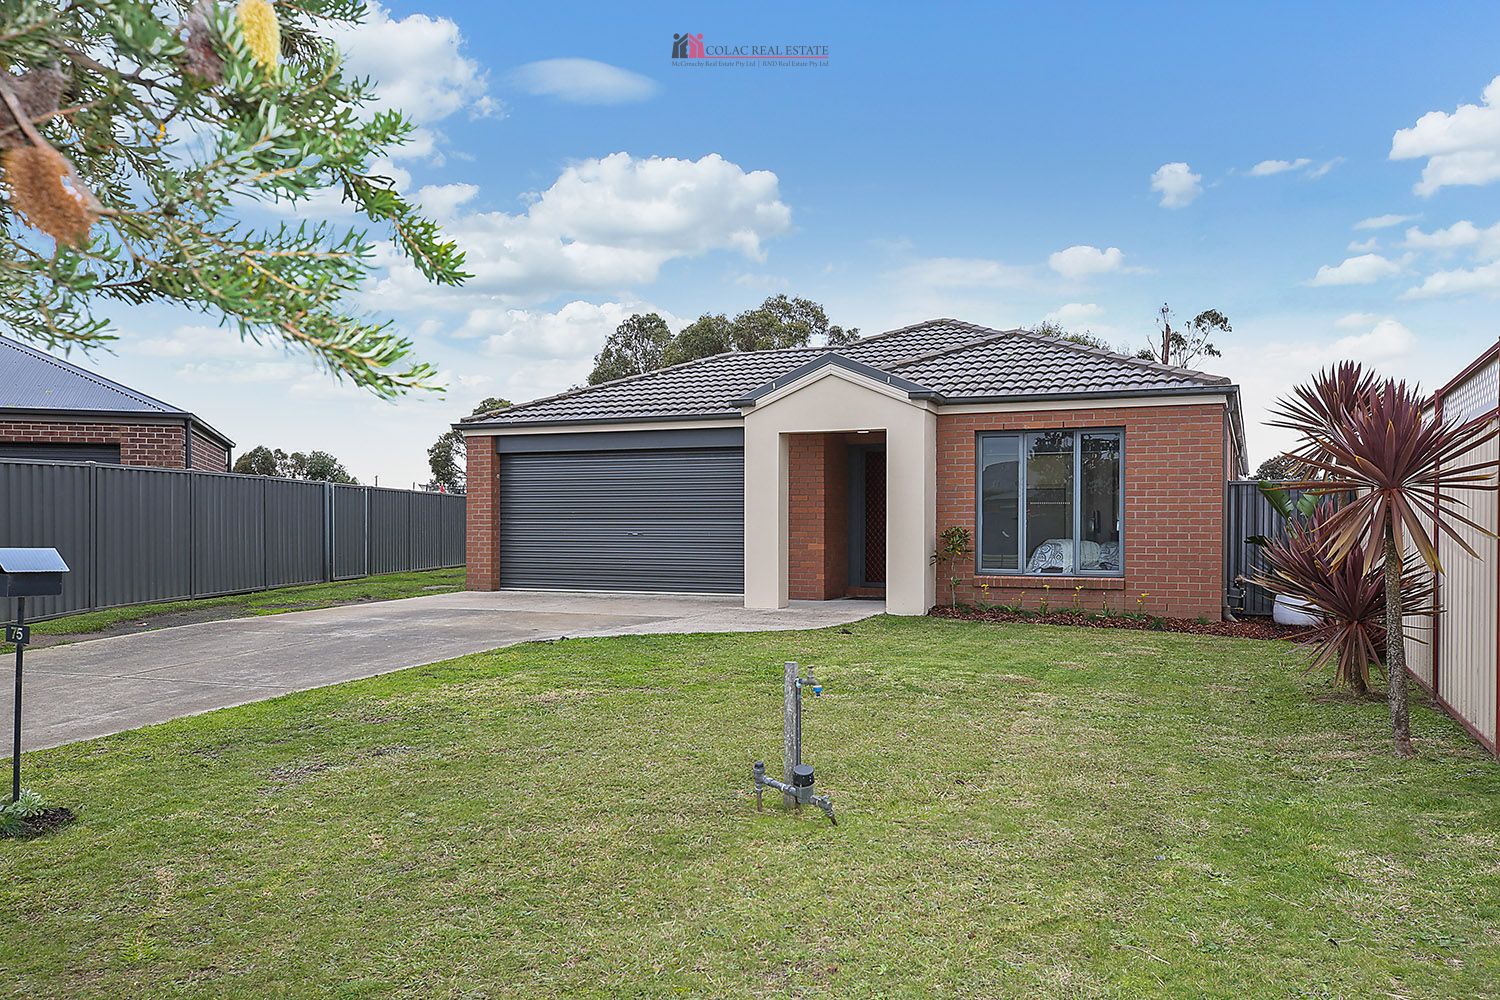 4 bedrooms House in 75 Imperial Drive COLAC VIC, 3250